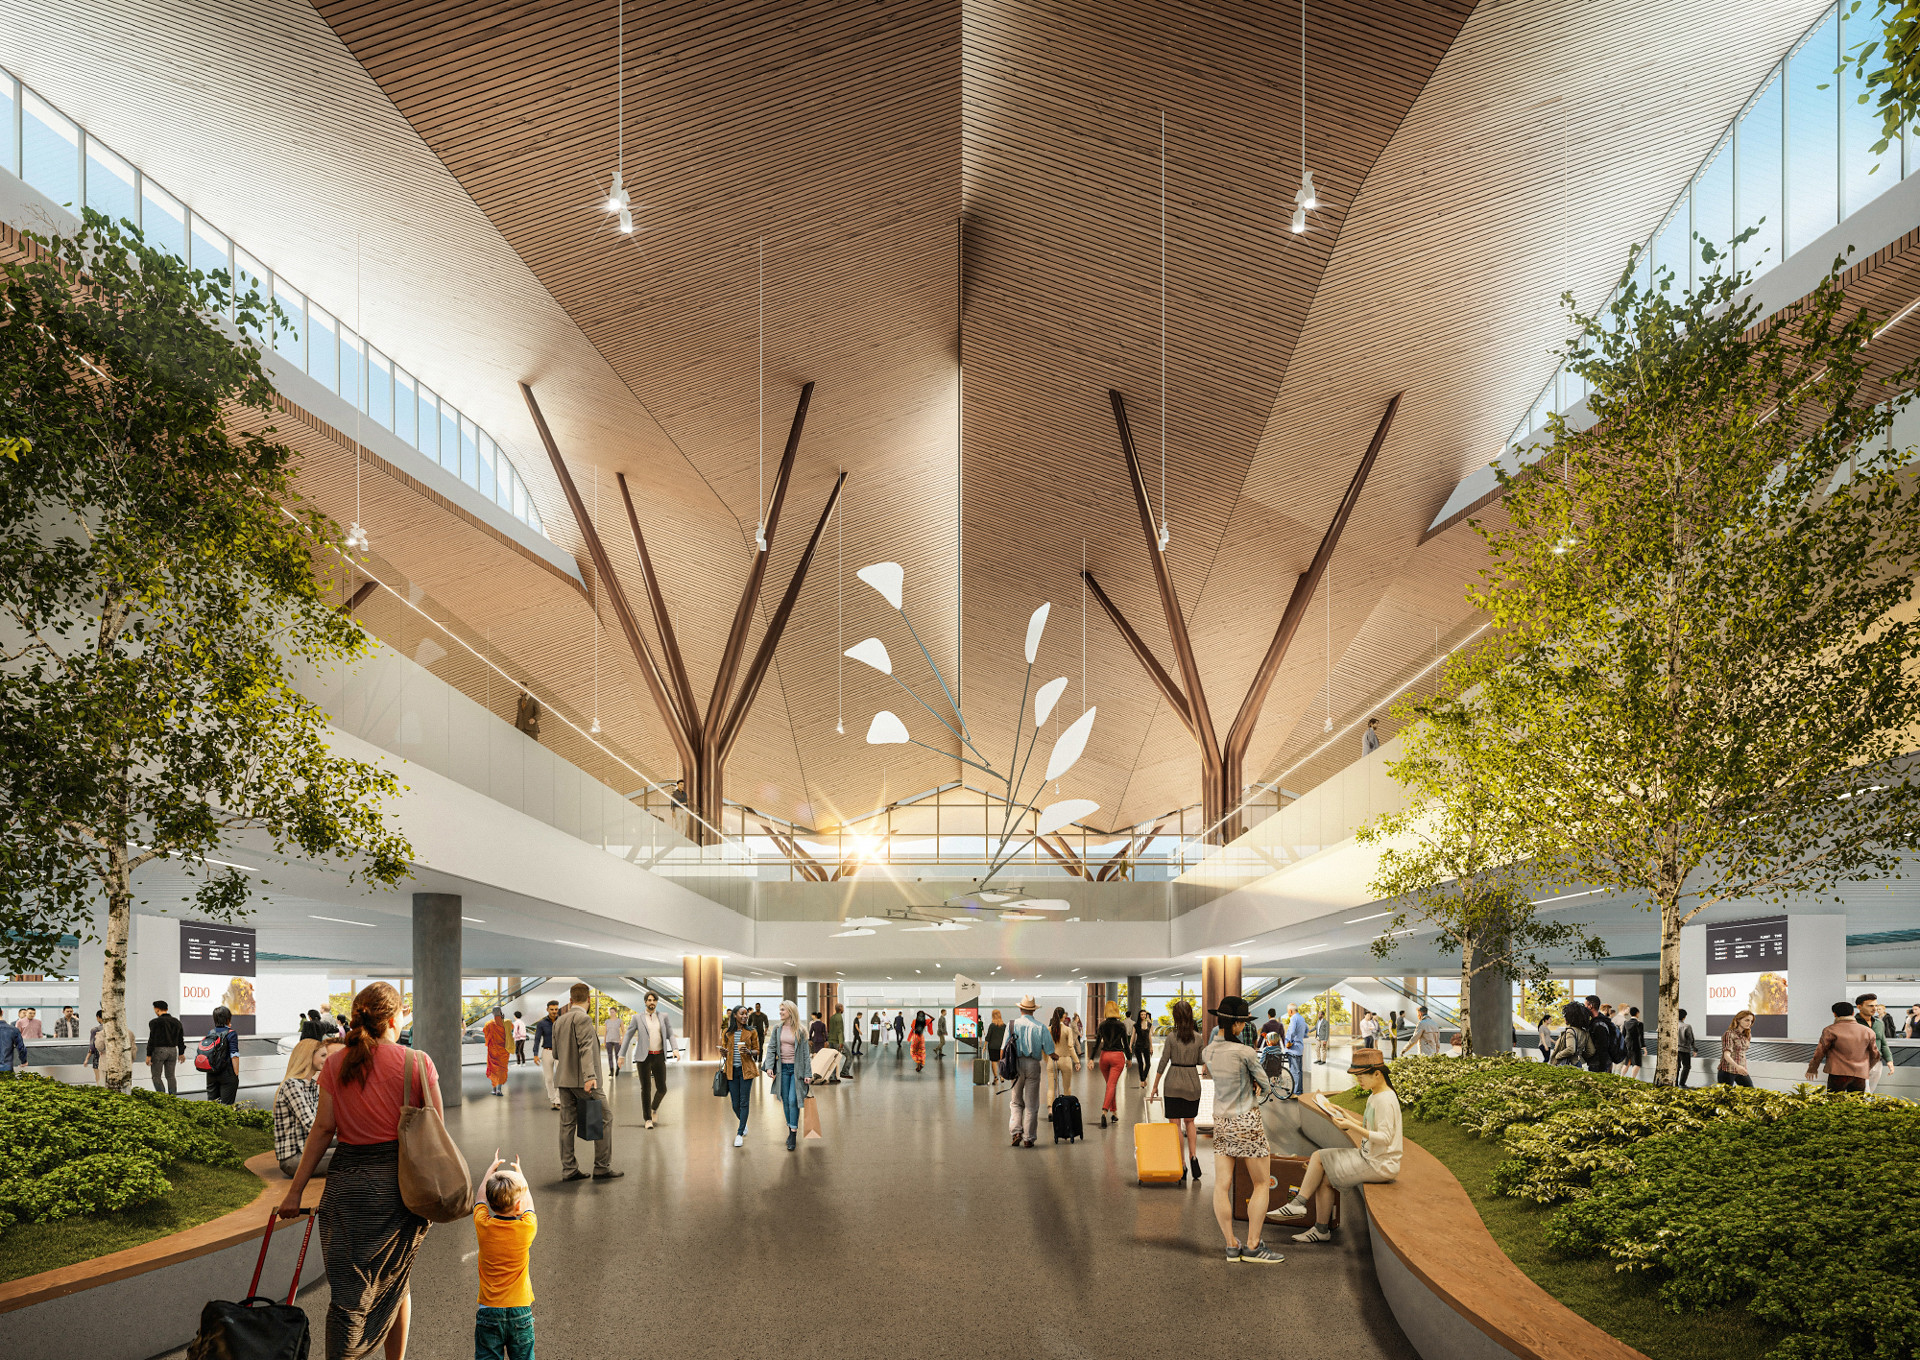 Pittsburgh International Airport Launches Next Stage of $1.4B Renovation